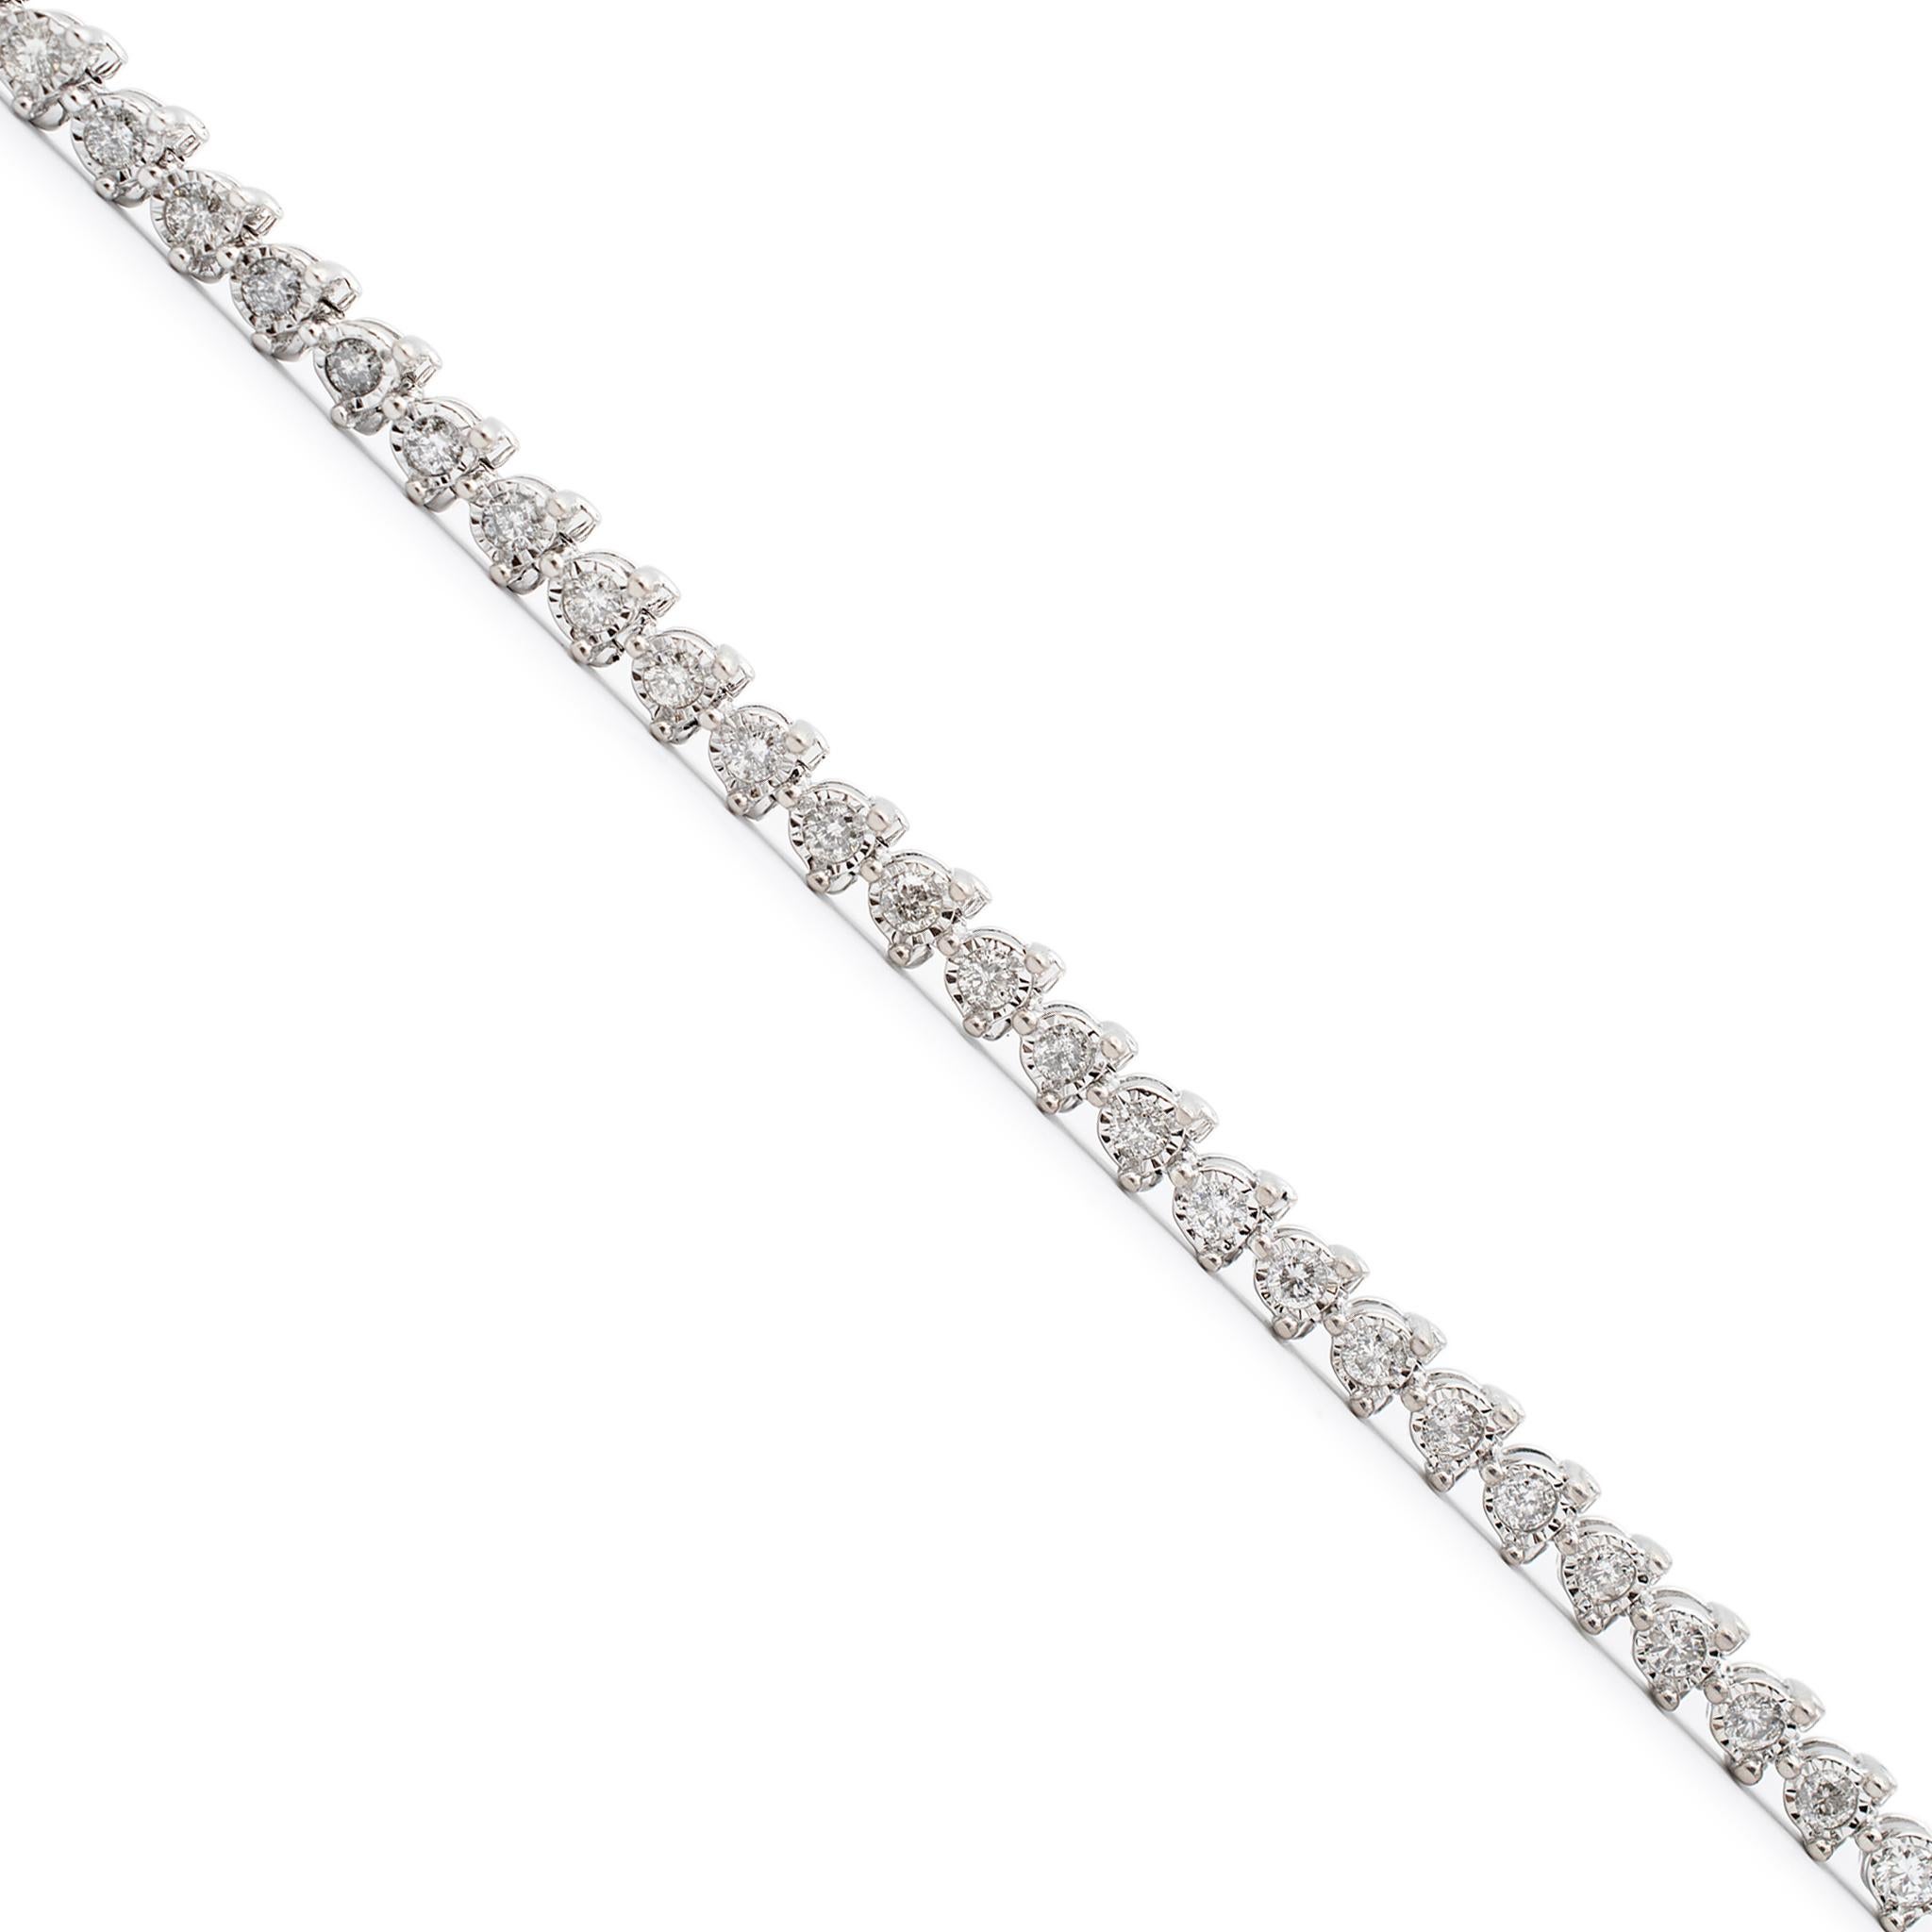 14K White Gold 1.71ct Diamond Tennis Bracelet In Excellent Condition For Sale In Houston, TX